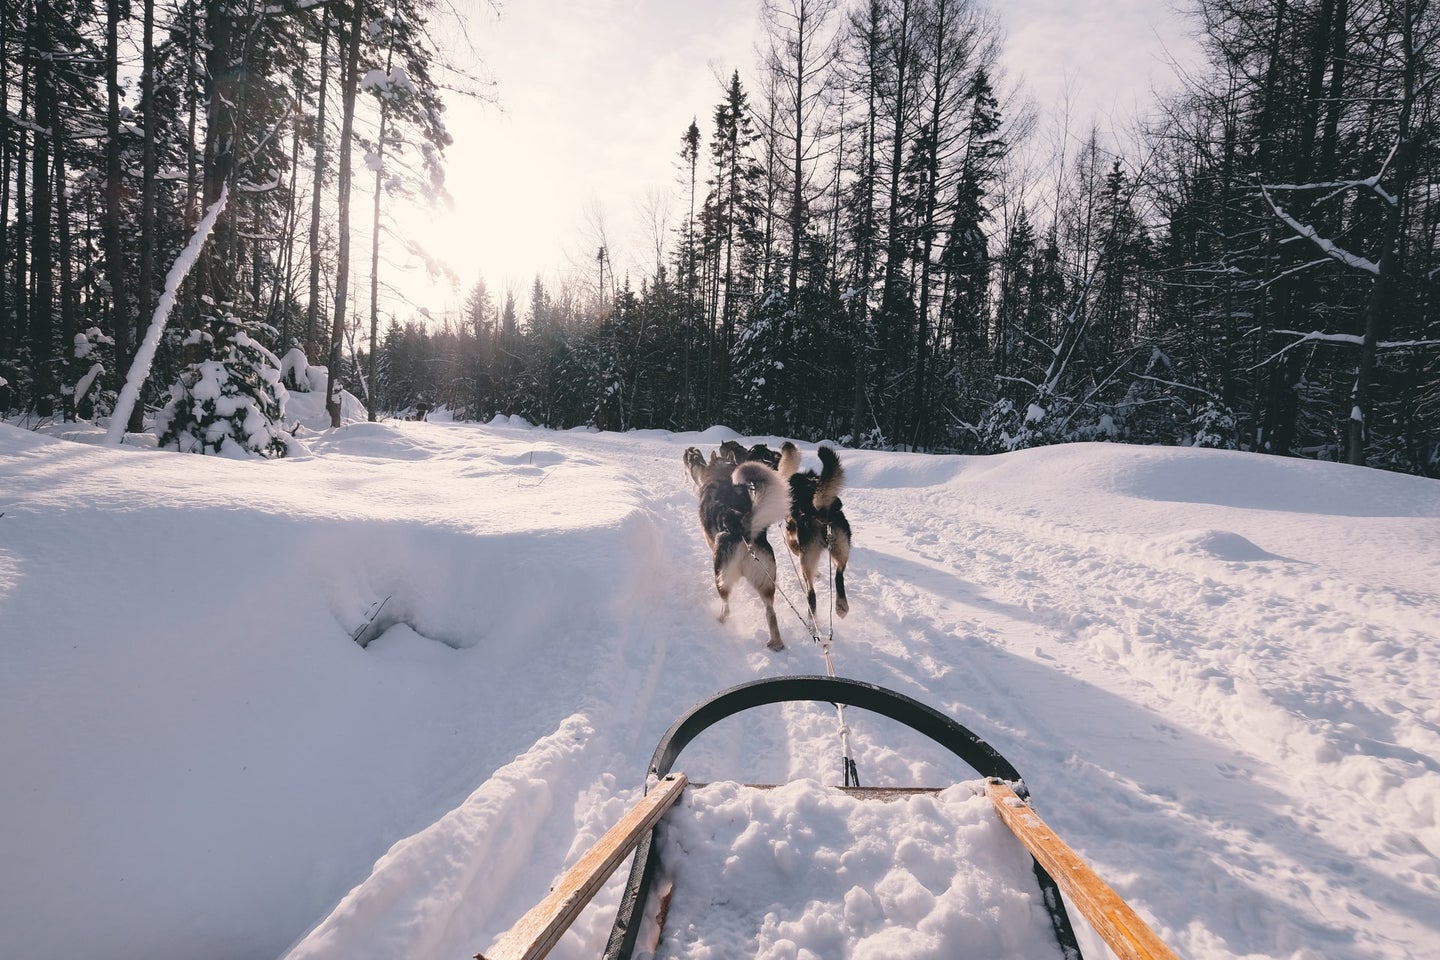 Sled pulled by dogs.